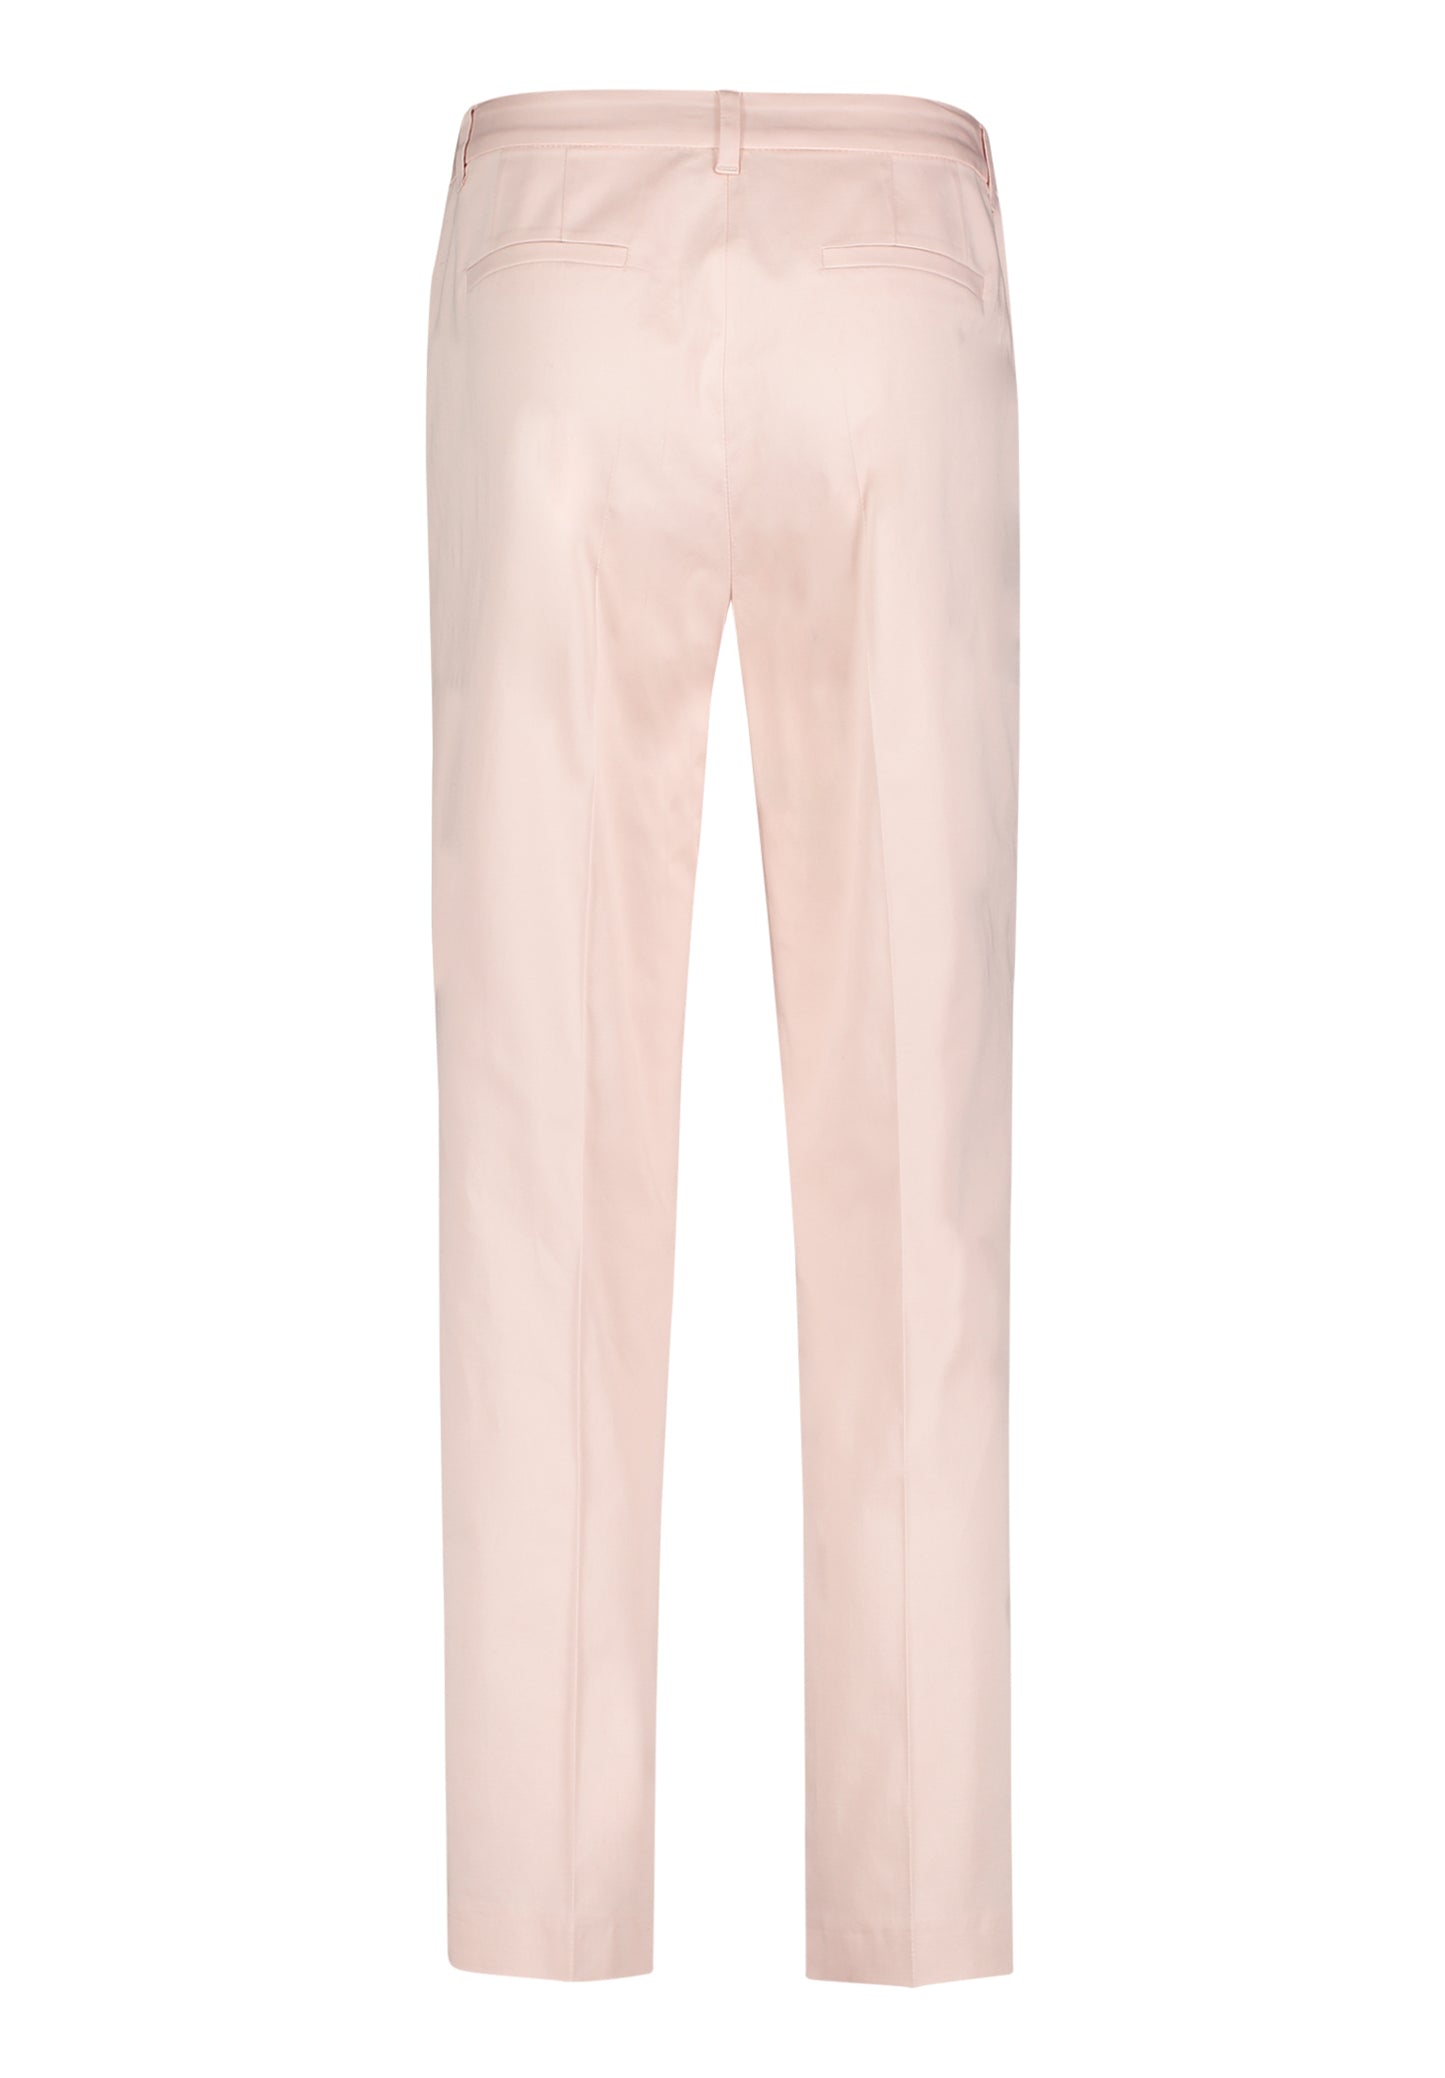 Trousers classic 1/1 length